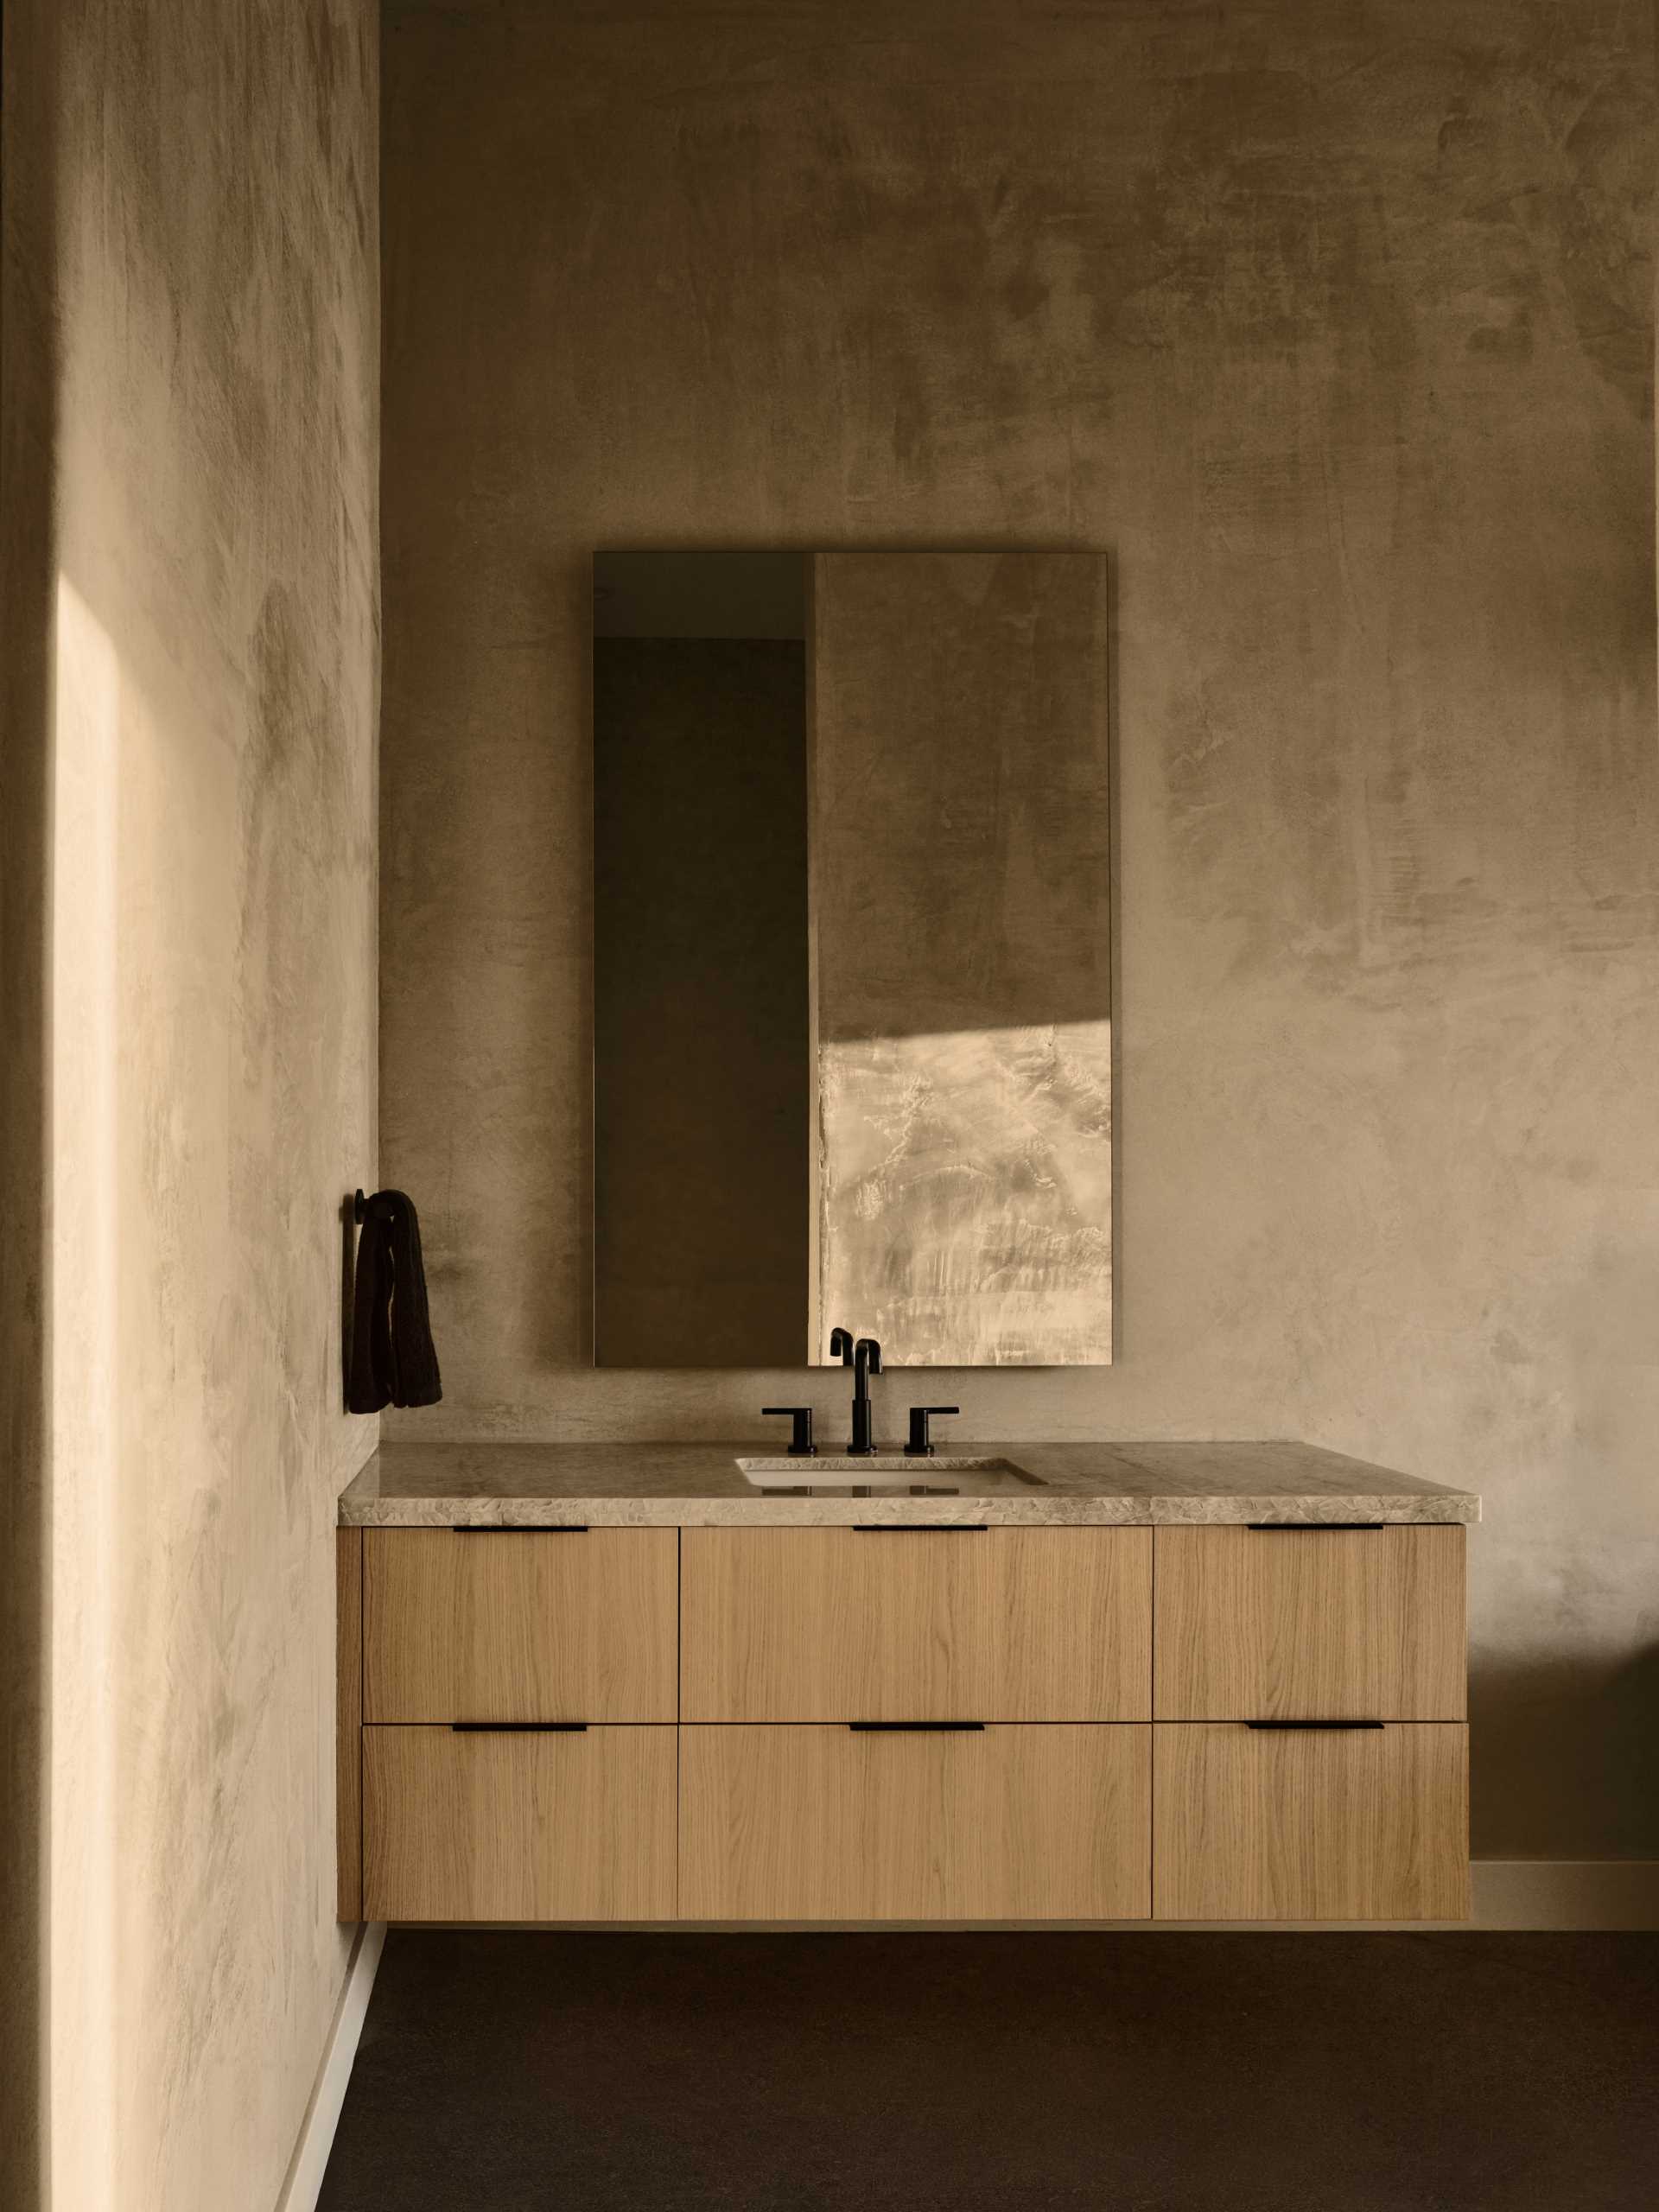 A modern and earth bathroom with a wood vanity.